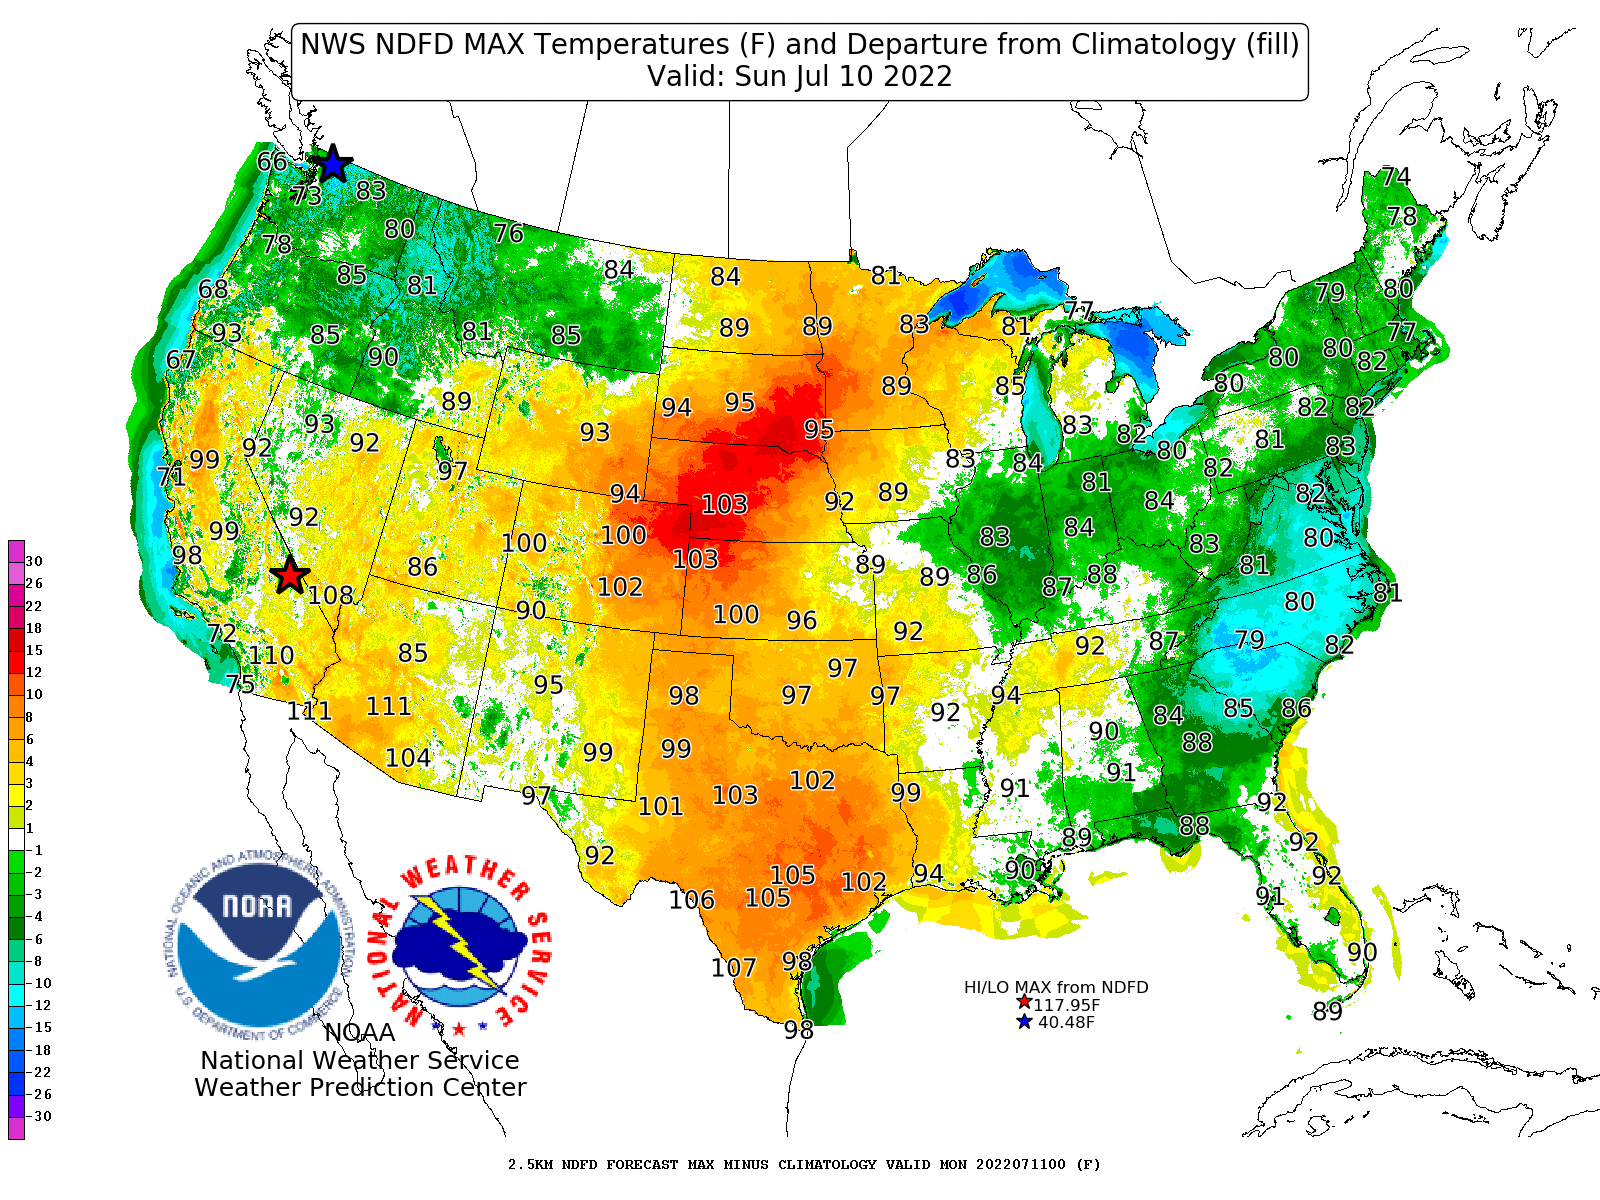 High temperature forecast for Sunday, July 10, 2022